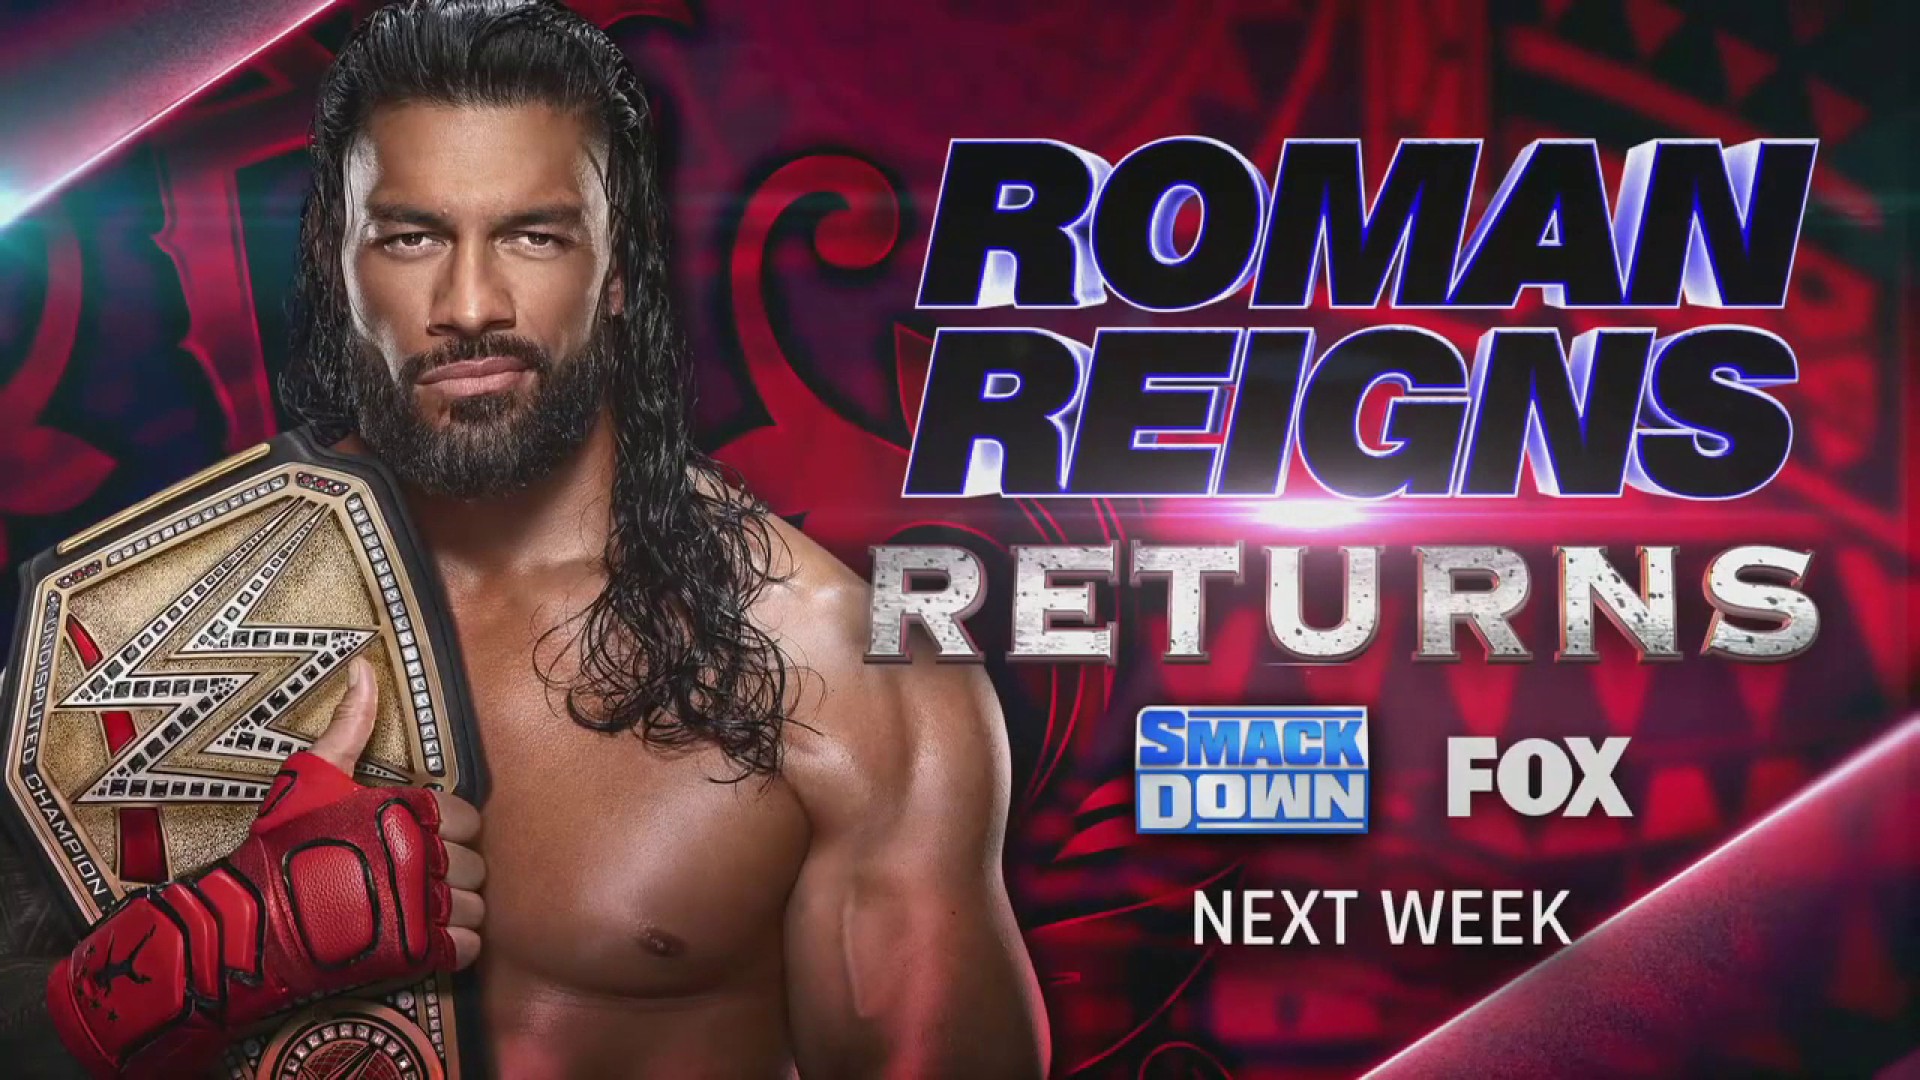 WWE SmackDown graphic advertising the return of Roman Reigns.